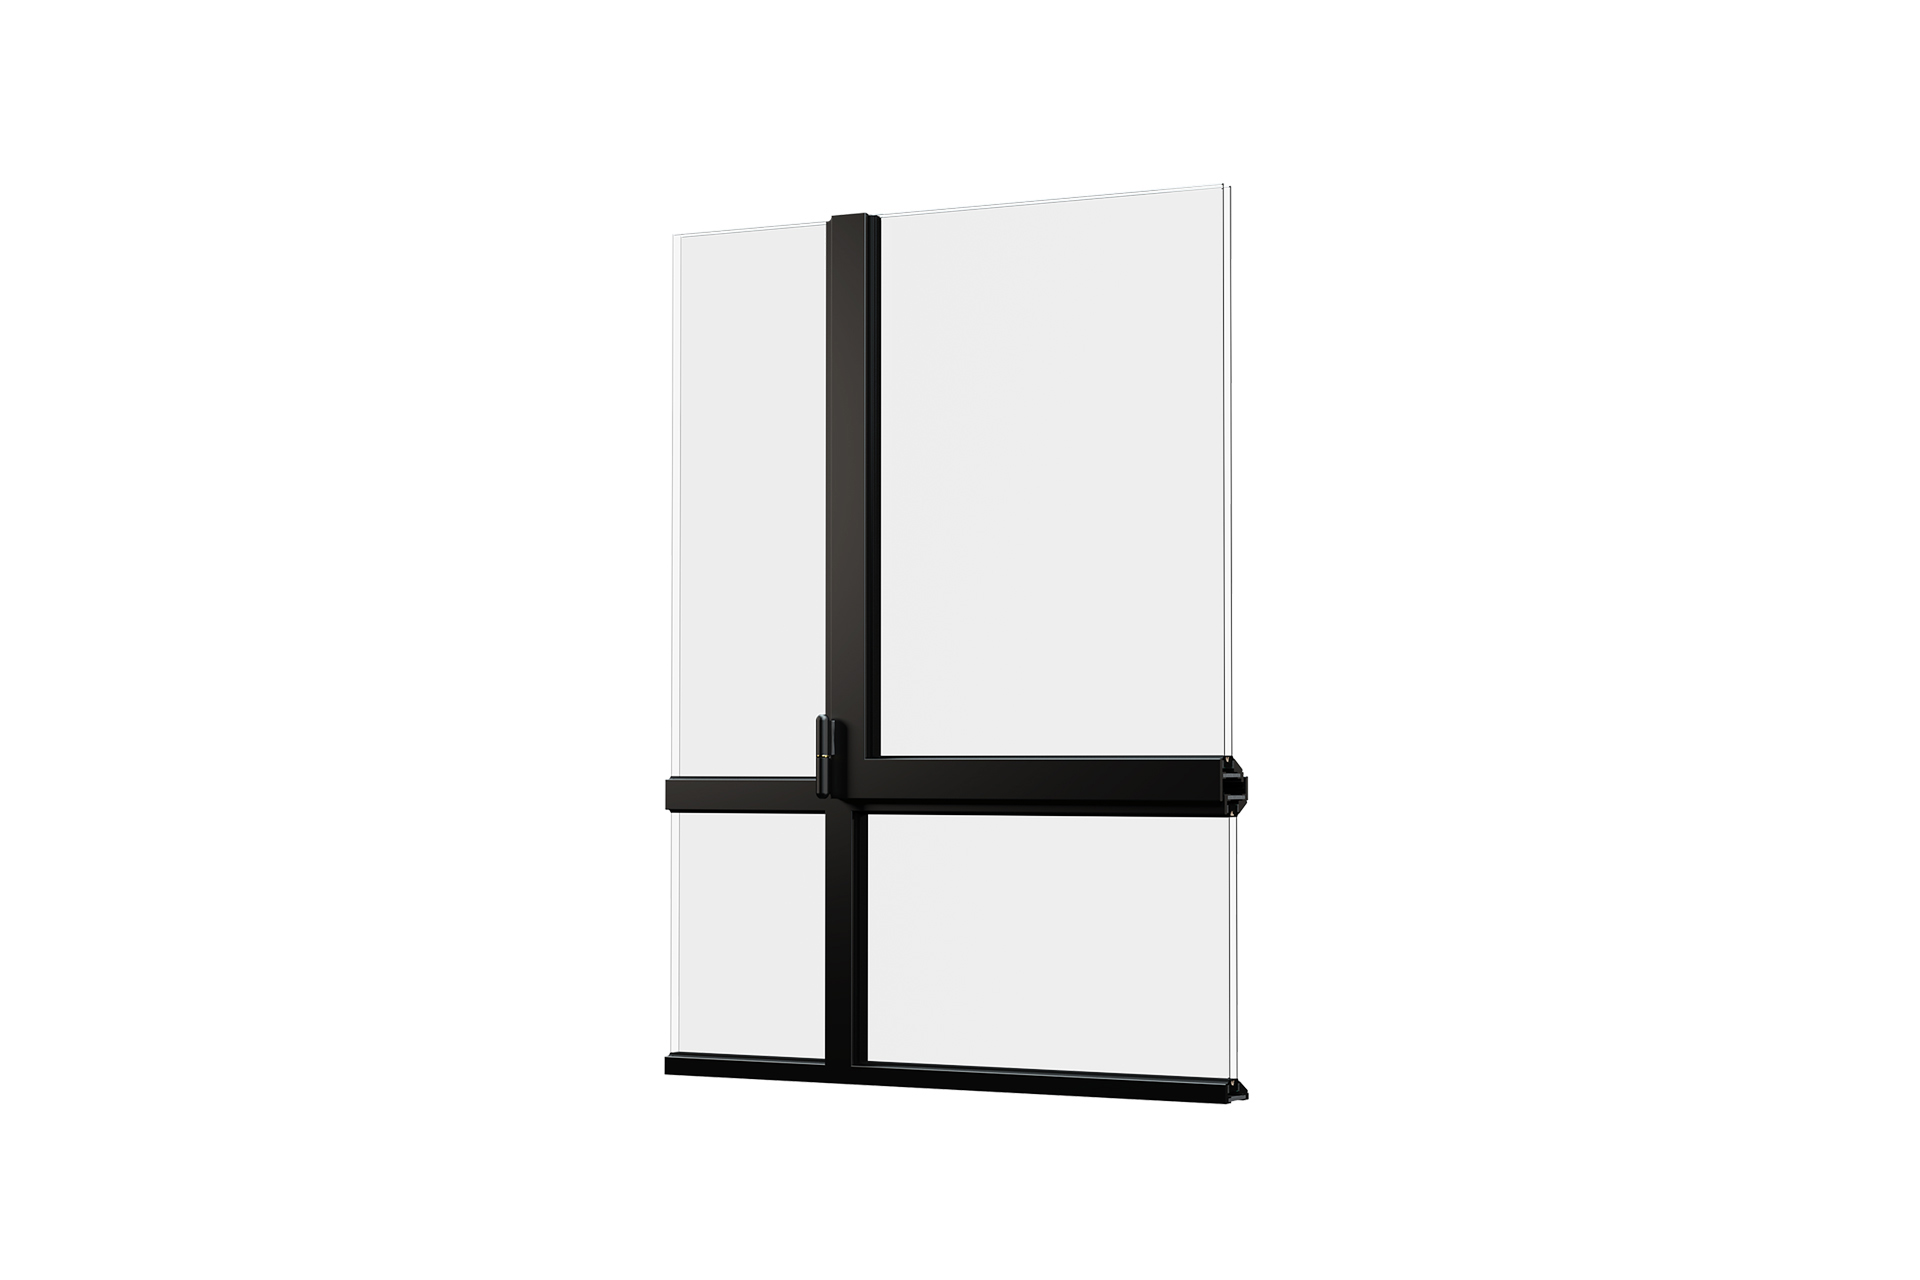 3D model of the CLASSIC-ISO profile system in a mondriaan shape, front view